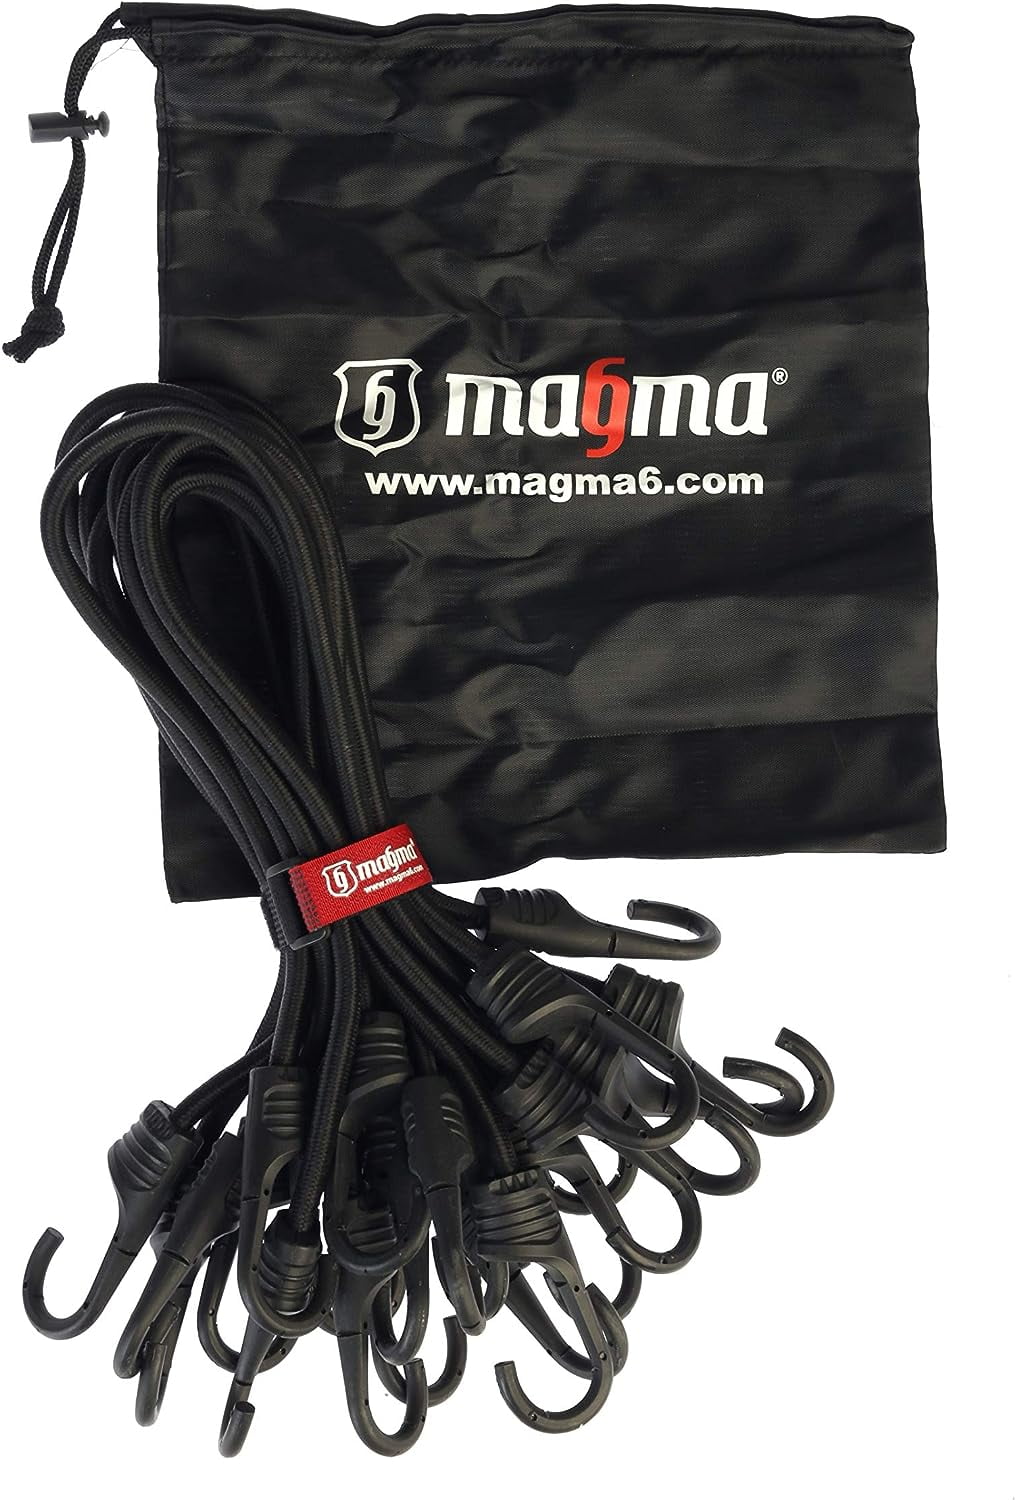 MAGMA 12 Bungee Cords Pack 1ft Max. Strength 153lbs Heavy Duty Elastic Cord Black